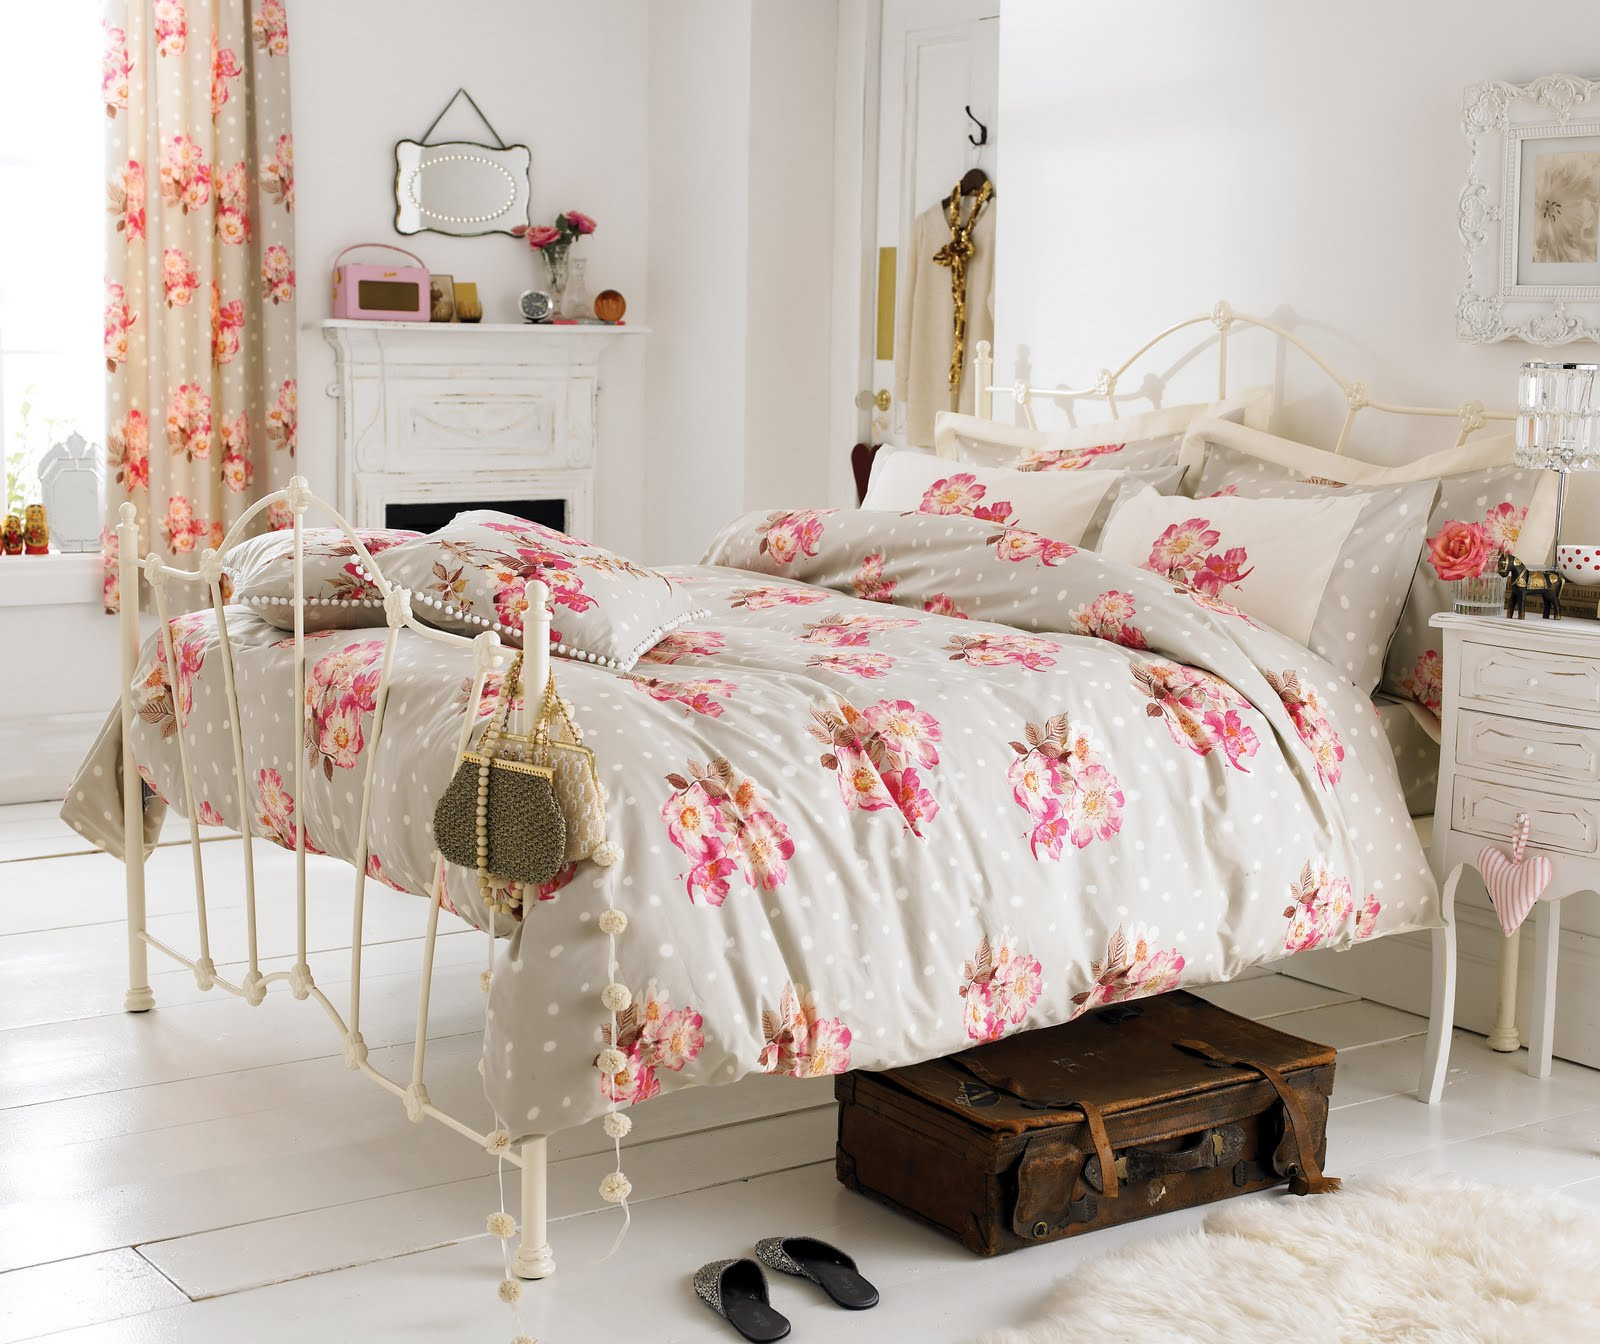 Shabby Chic Bedroom Set
 Vintage Your Room with 9 Shabby Chic Bedroom Furniture